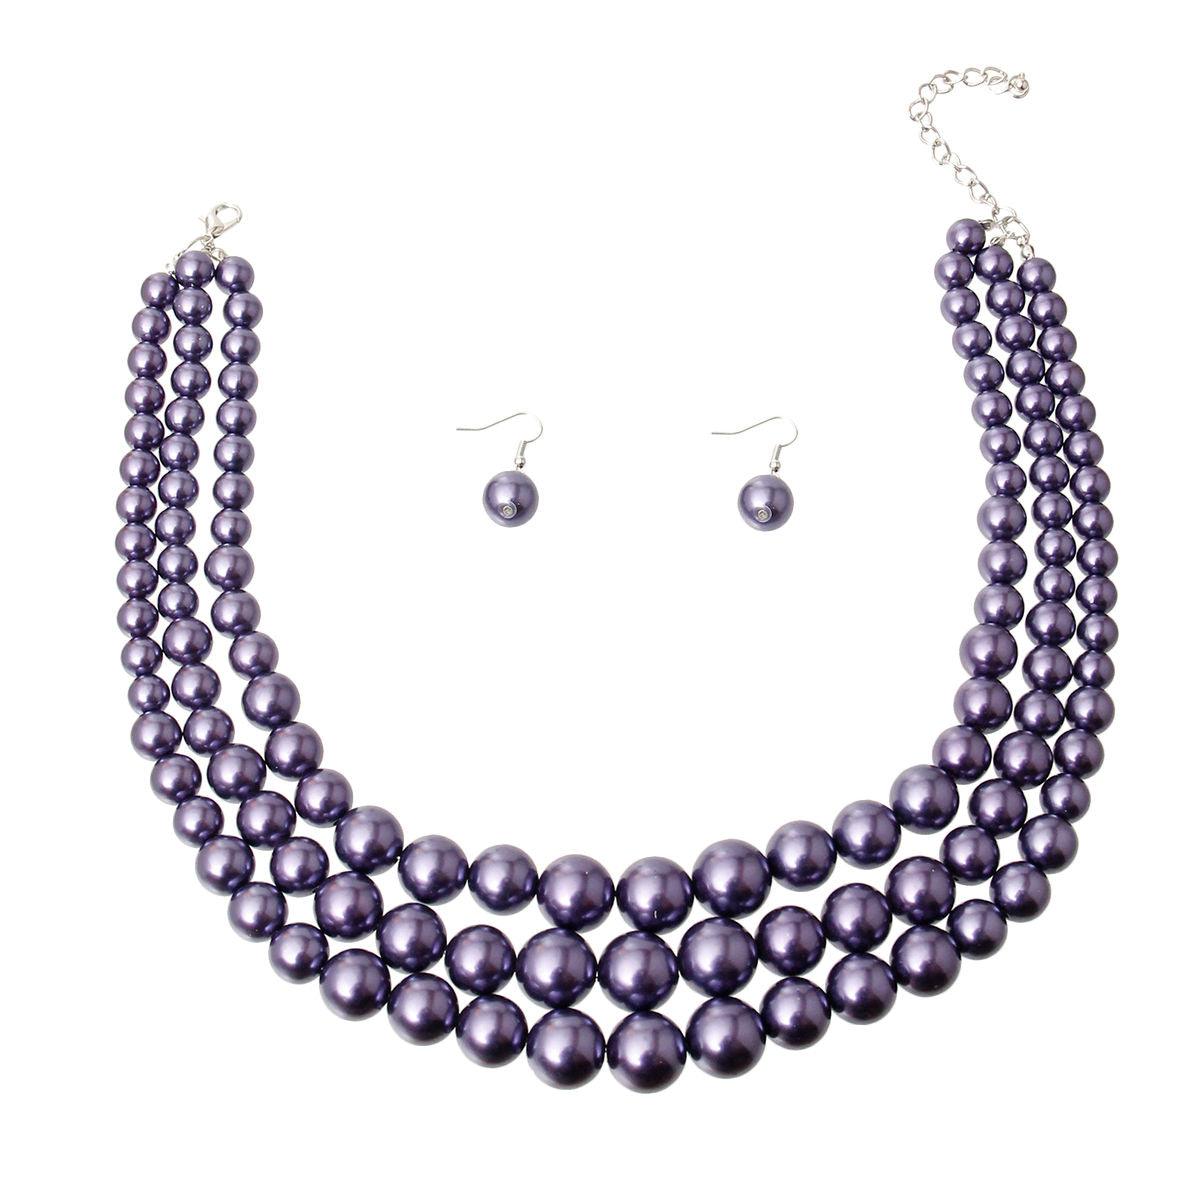 Lustrous Celebration Triple Strand Purple Pearl Necklace Set - Stunning Gems for Unforgettable Moments!